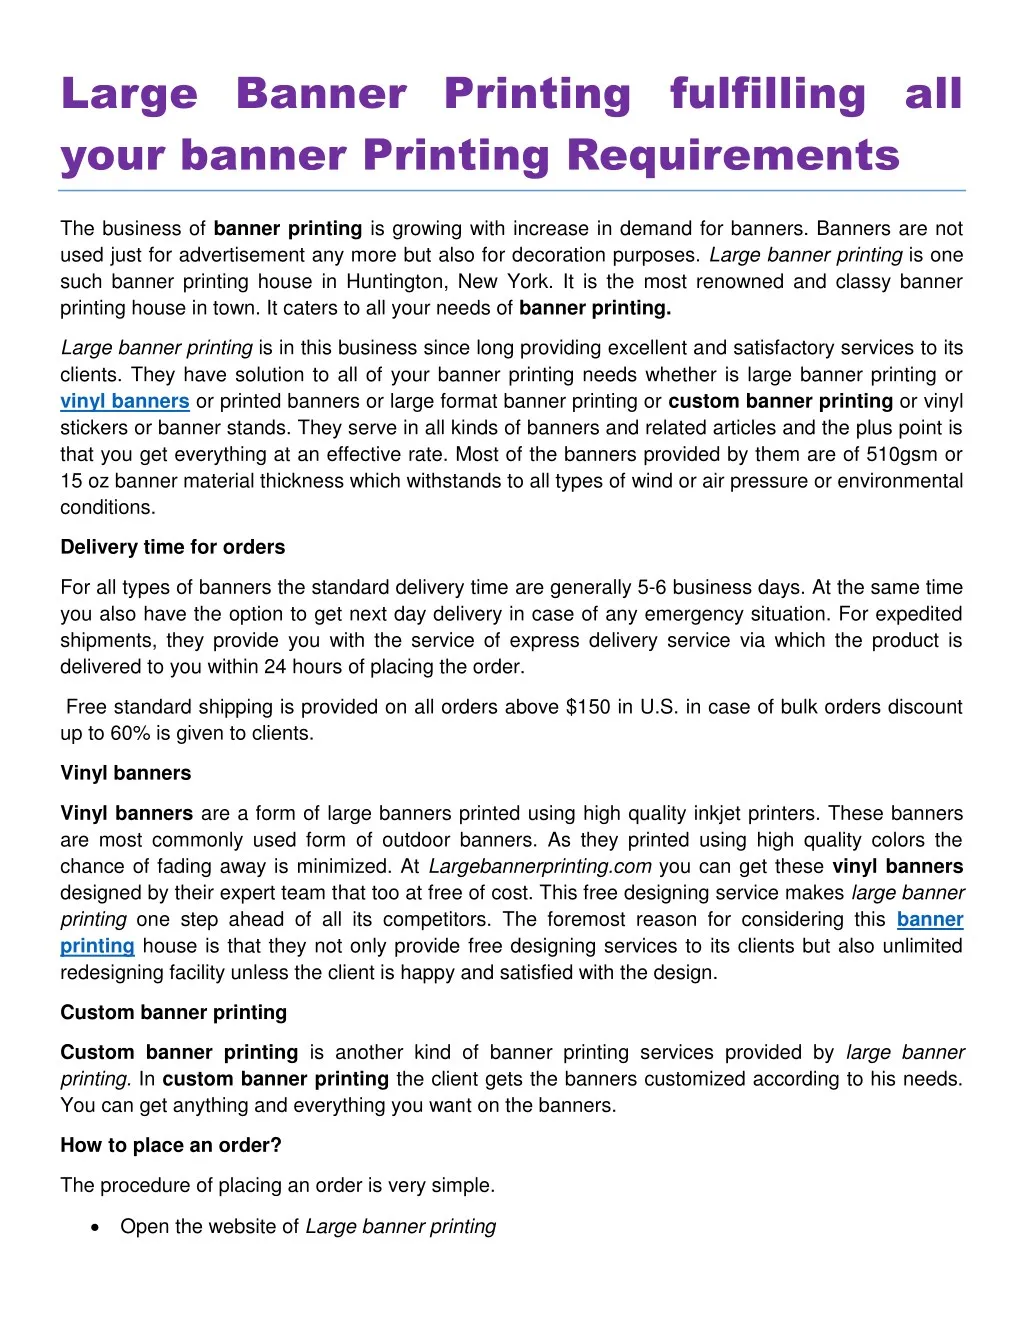 large banner printing fulfilling all your banner